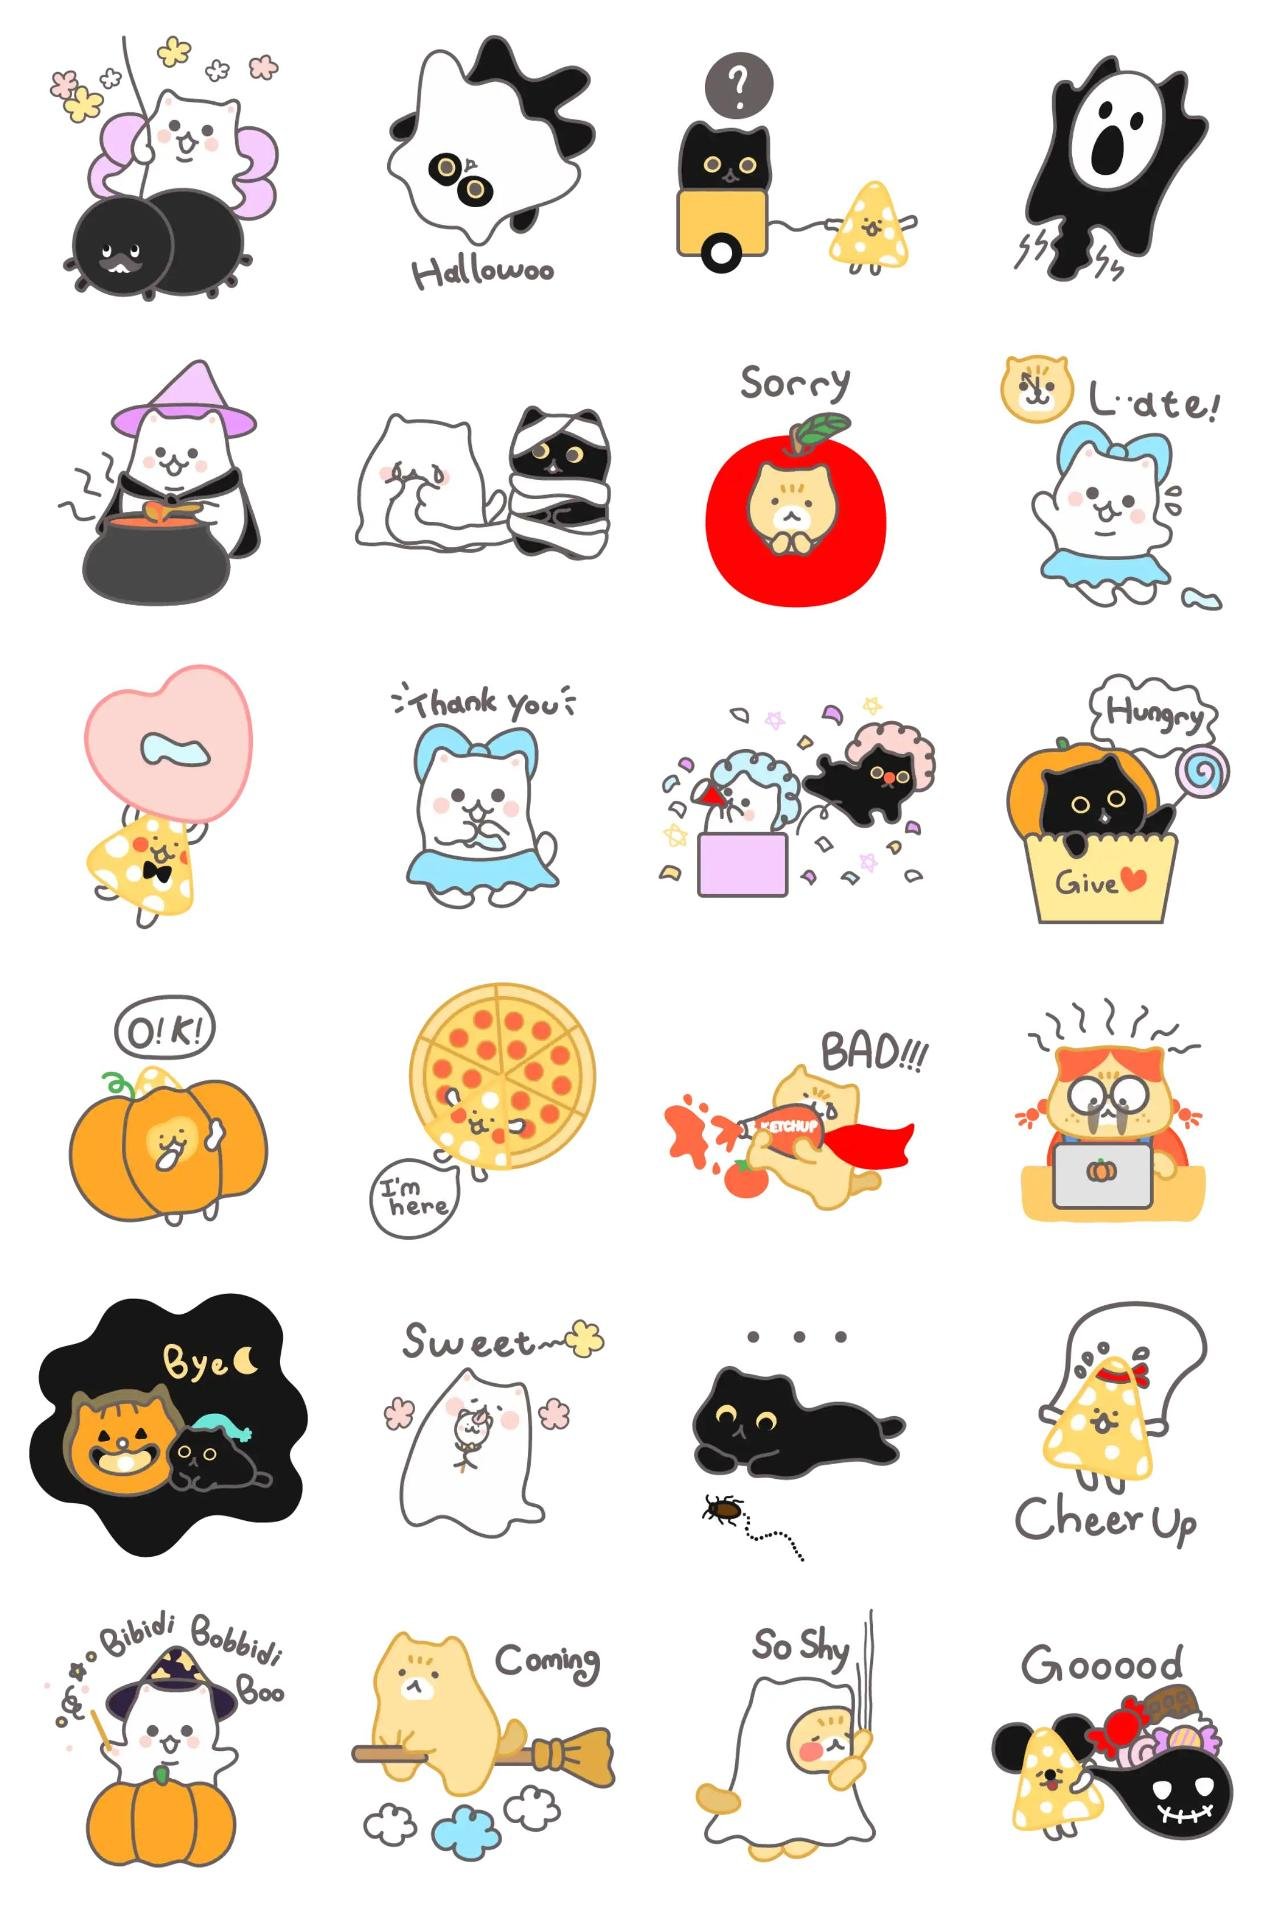 Say Halloween! Kitty Trio Animals,Phrases sticker pack for Whatsapp, Telegram, Signal, and others chatting and message apps